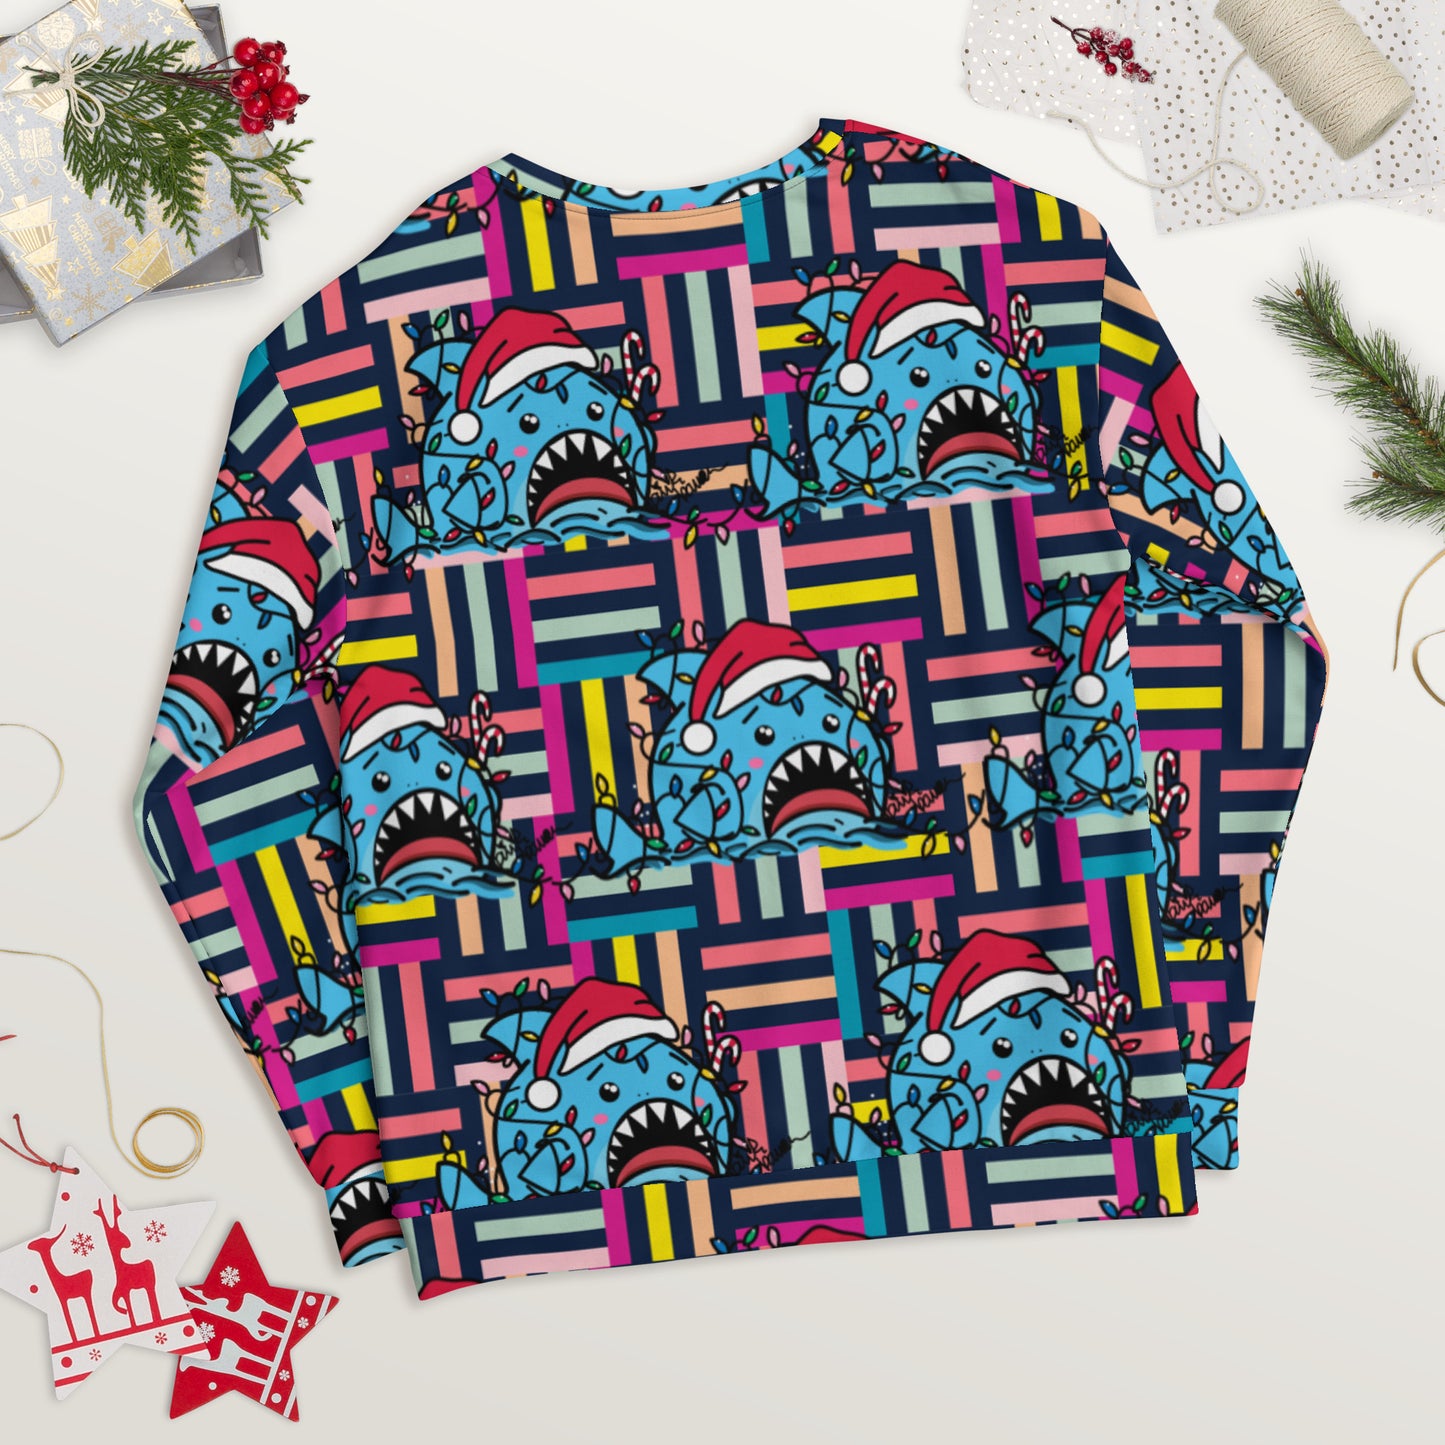 Holiday Sharks Ugly Christmas Sweater- Let There Be Lights (Genderless Sweatshirt)